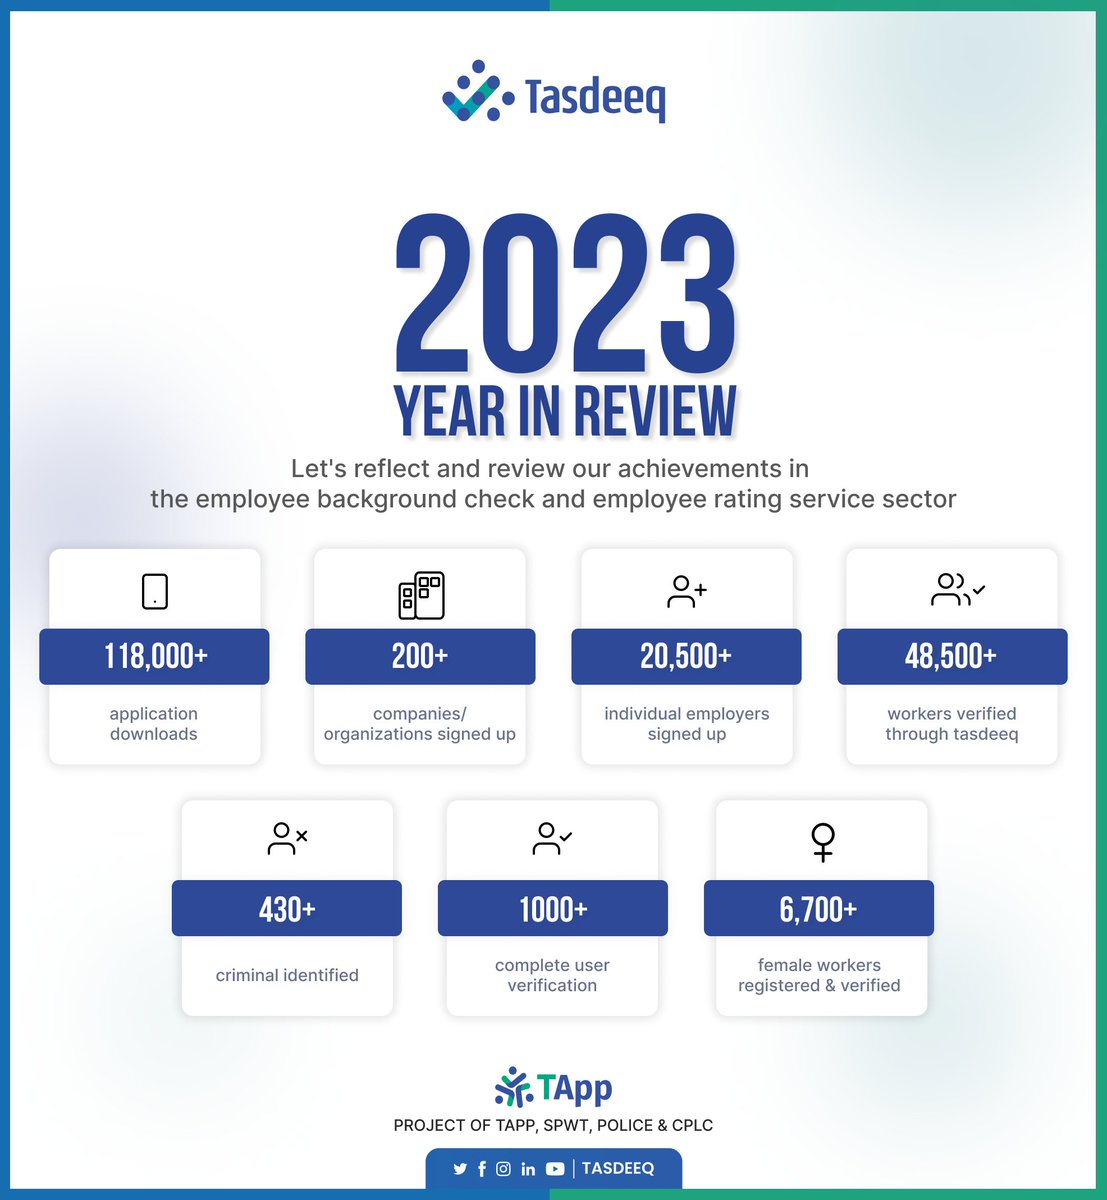 A bit delayed in sharing this, but still thrilled to reveal the impact we made in 2023. 

#2023year #acheivements #stats #tasdeeq #tasdeeqpakistan #tapp #pakistan #backgroundcheck #sharing